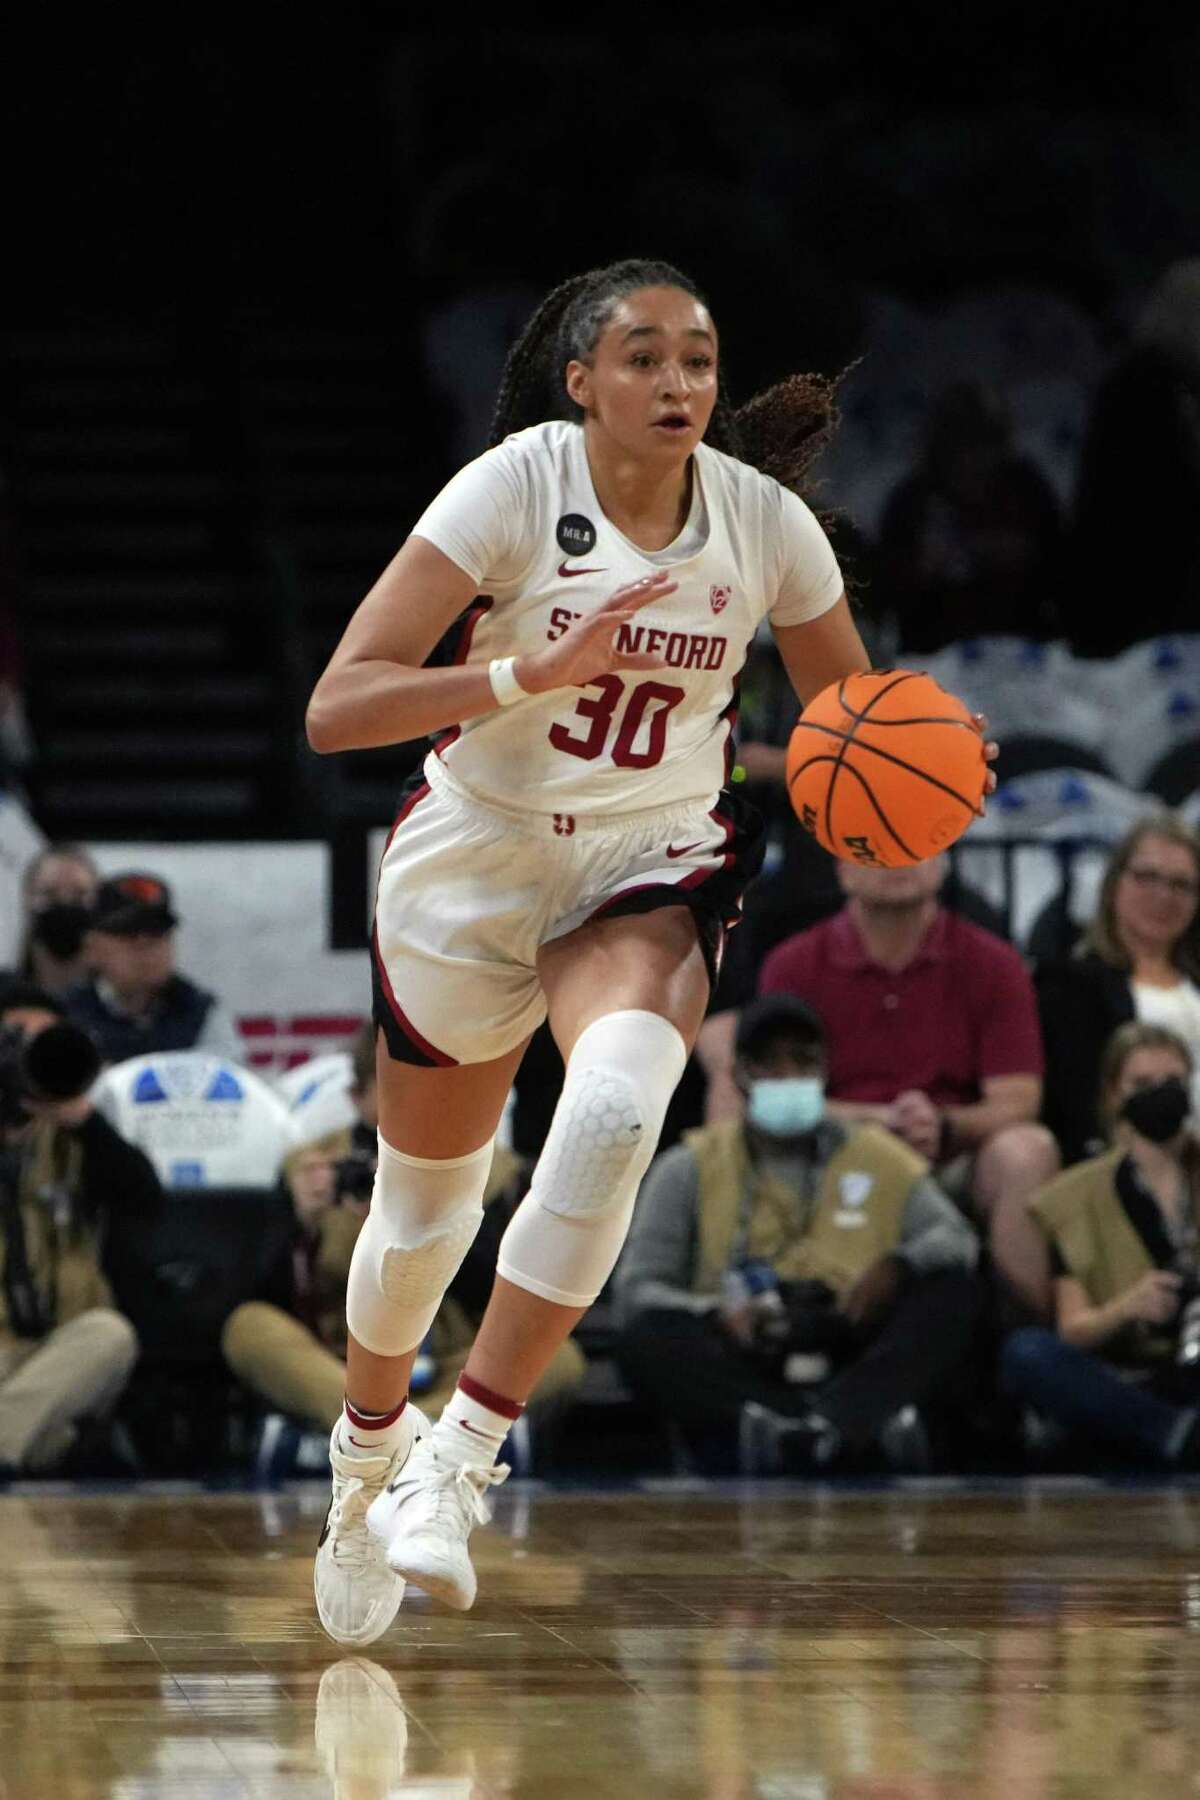 LAS VEGAS, NEVADA - MARCH 06: Haley Jones #30 of the Stanford Cardinal advances the ball against the Utah Utes during the championship game of the Pac-12 Conference women's basketball tournament at Michelob ULTRA Arena on March 06, 2022 in Las Vegas, Nevada. (Photo by Joe Buglewicz/Getty Images)